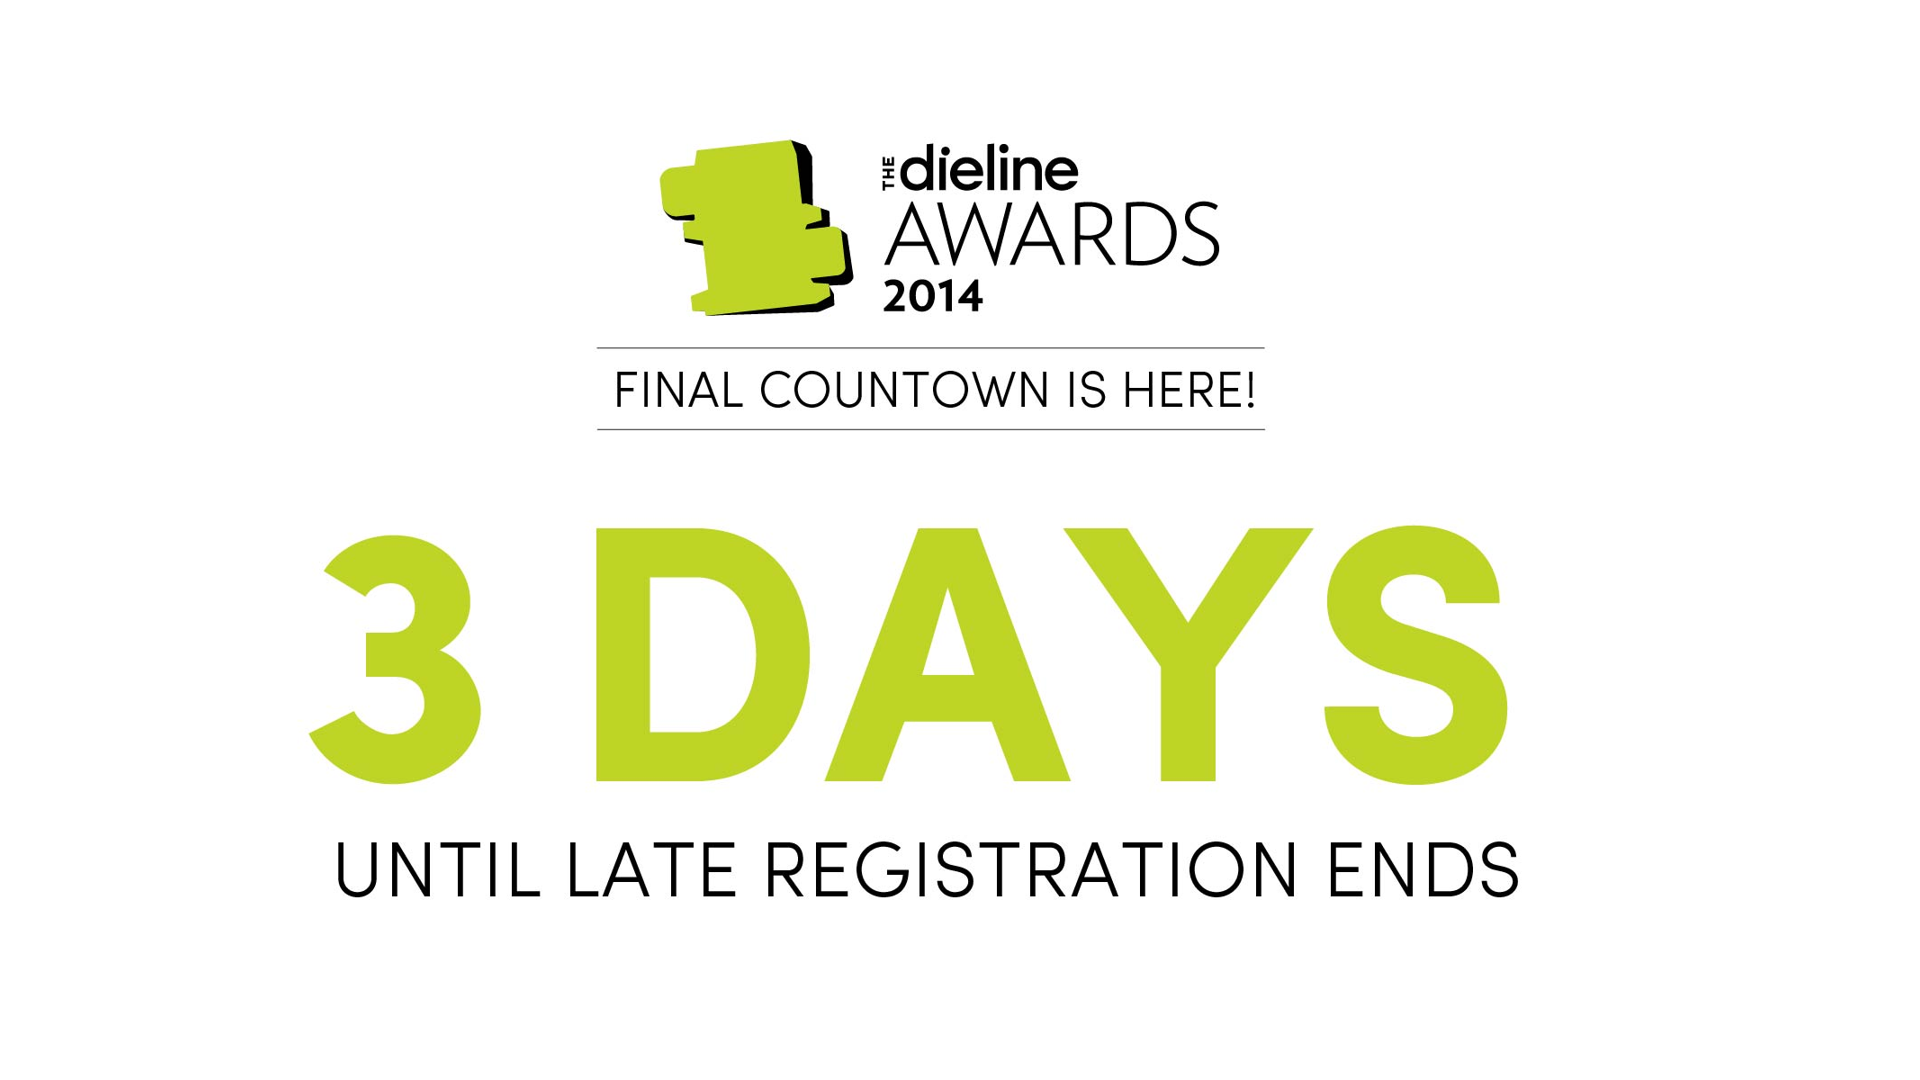 Featured image for The Dieline Awards: FINAL COUNTDOWN - 3 Days Until Late Registration Ends